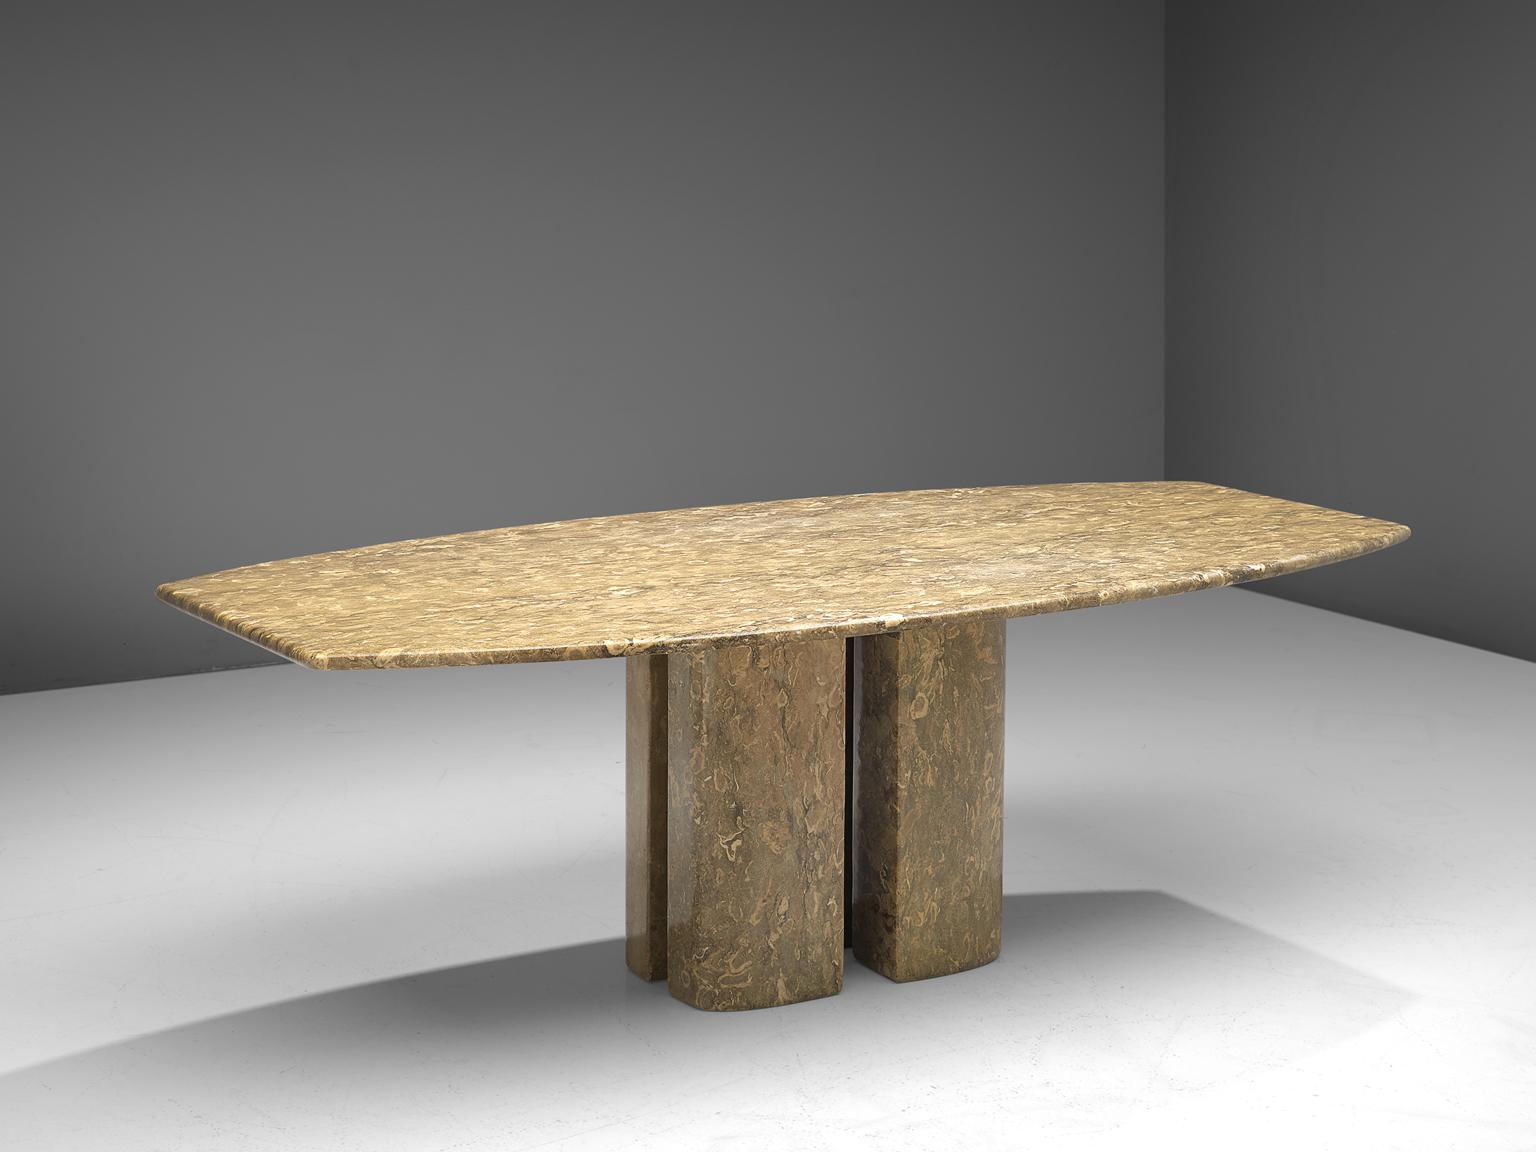 Giancarlo Sala for Marmi Sala&Co, pedestal table, marble, Italy, 1970s

This table is a beautiful example of Italian design in the 1970s. With an almost monumental appearance the natural look of the marble adds some softness to the design. The